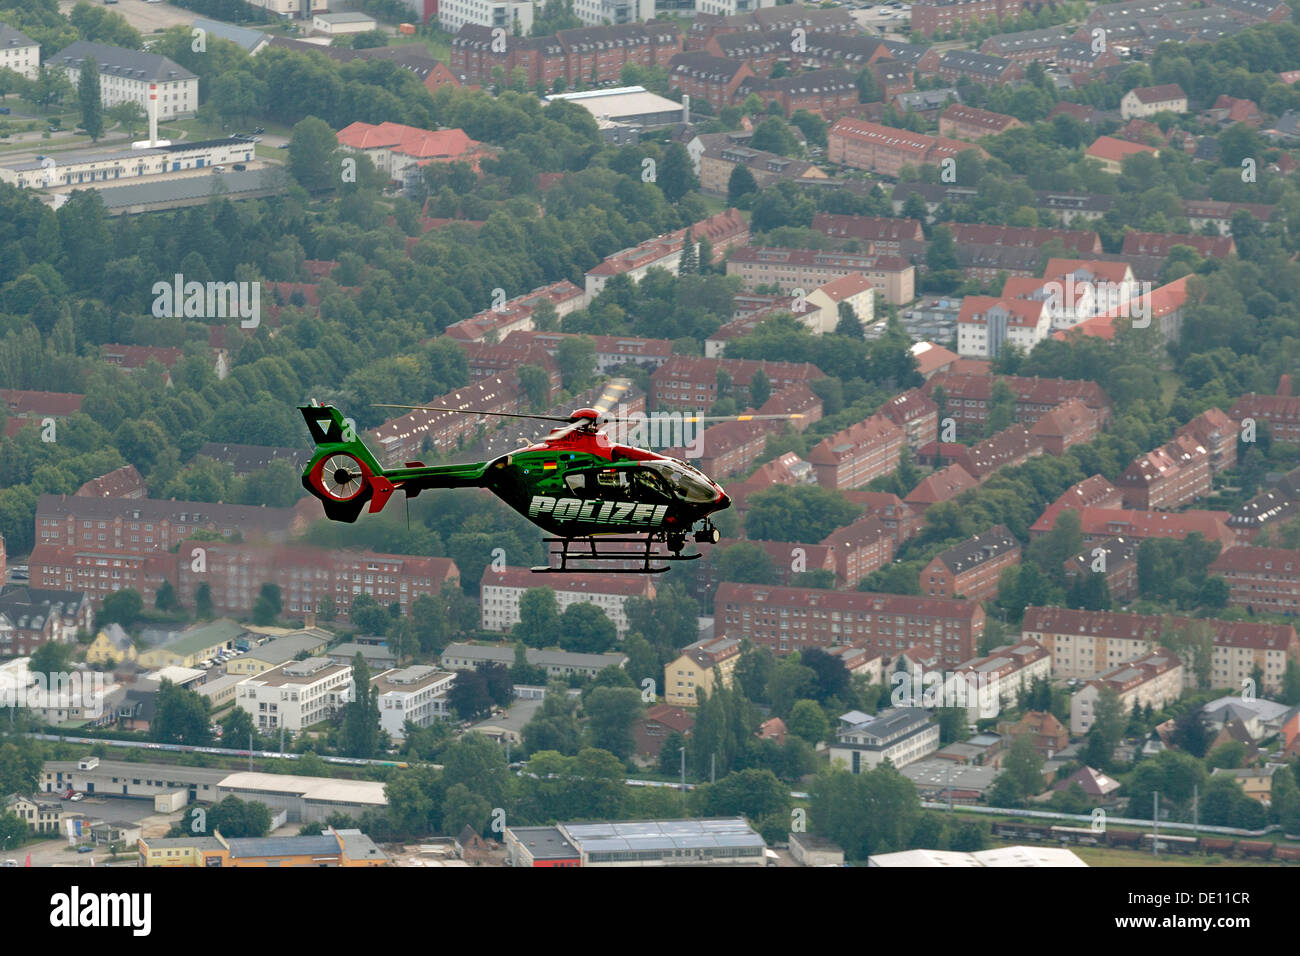 Aerial photo, police helicopter in flight over Rostock Stock Photo